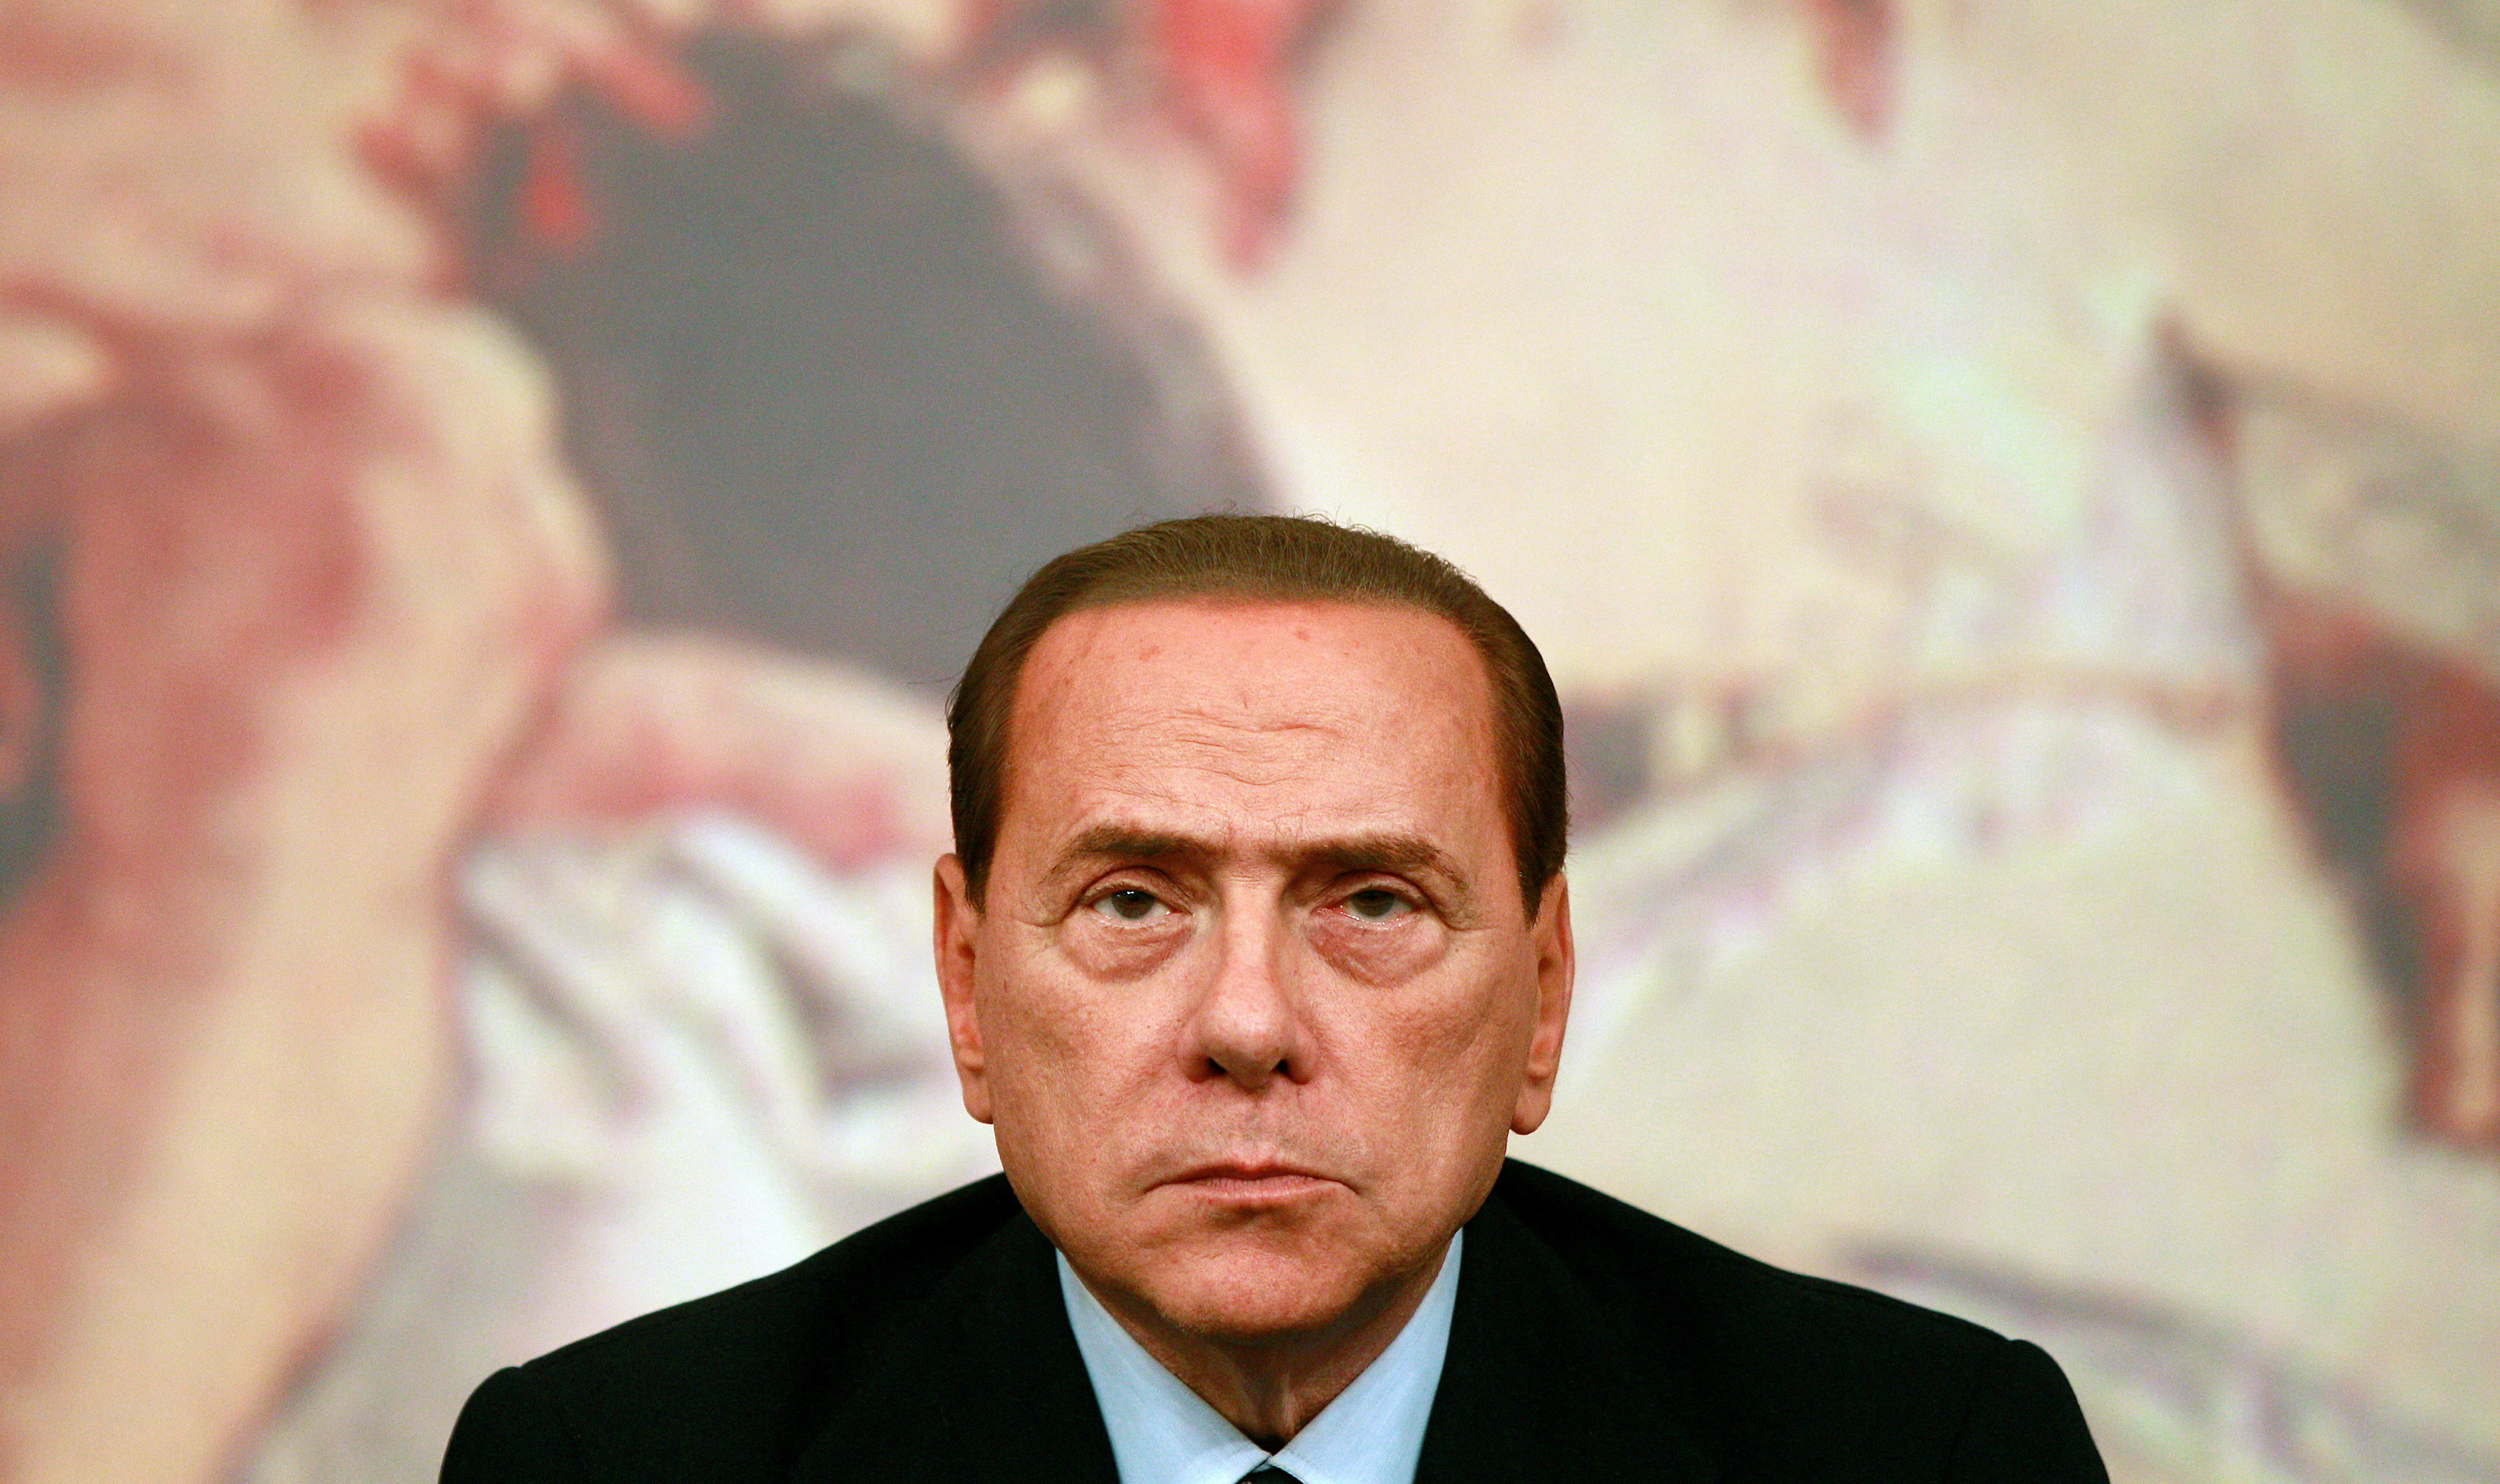 Italy's Prime Minister Berlusconi looks on during a news conference at Chigi Palace in Rome